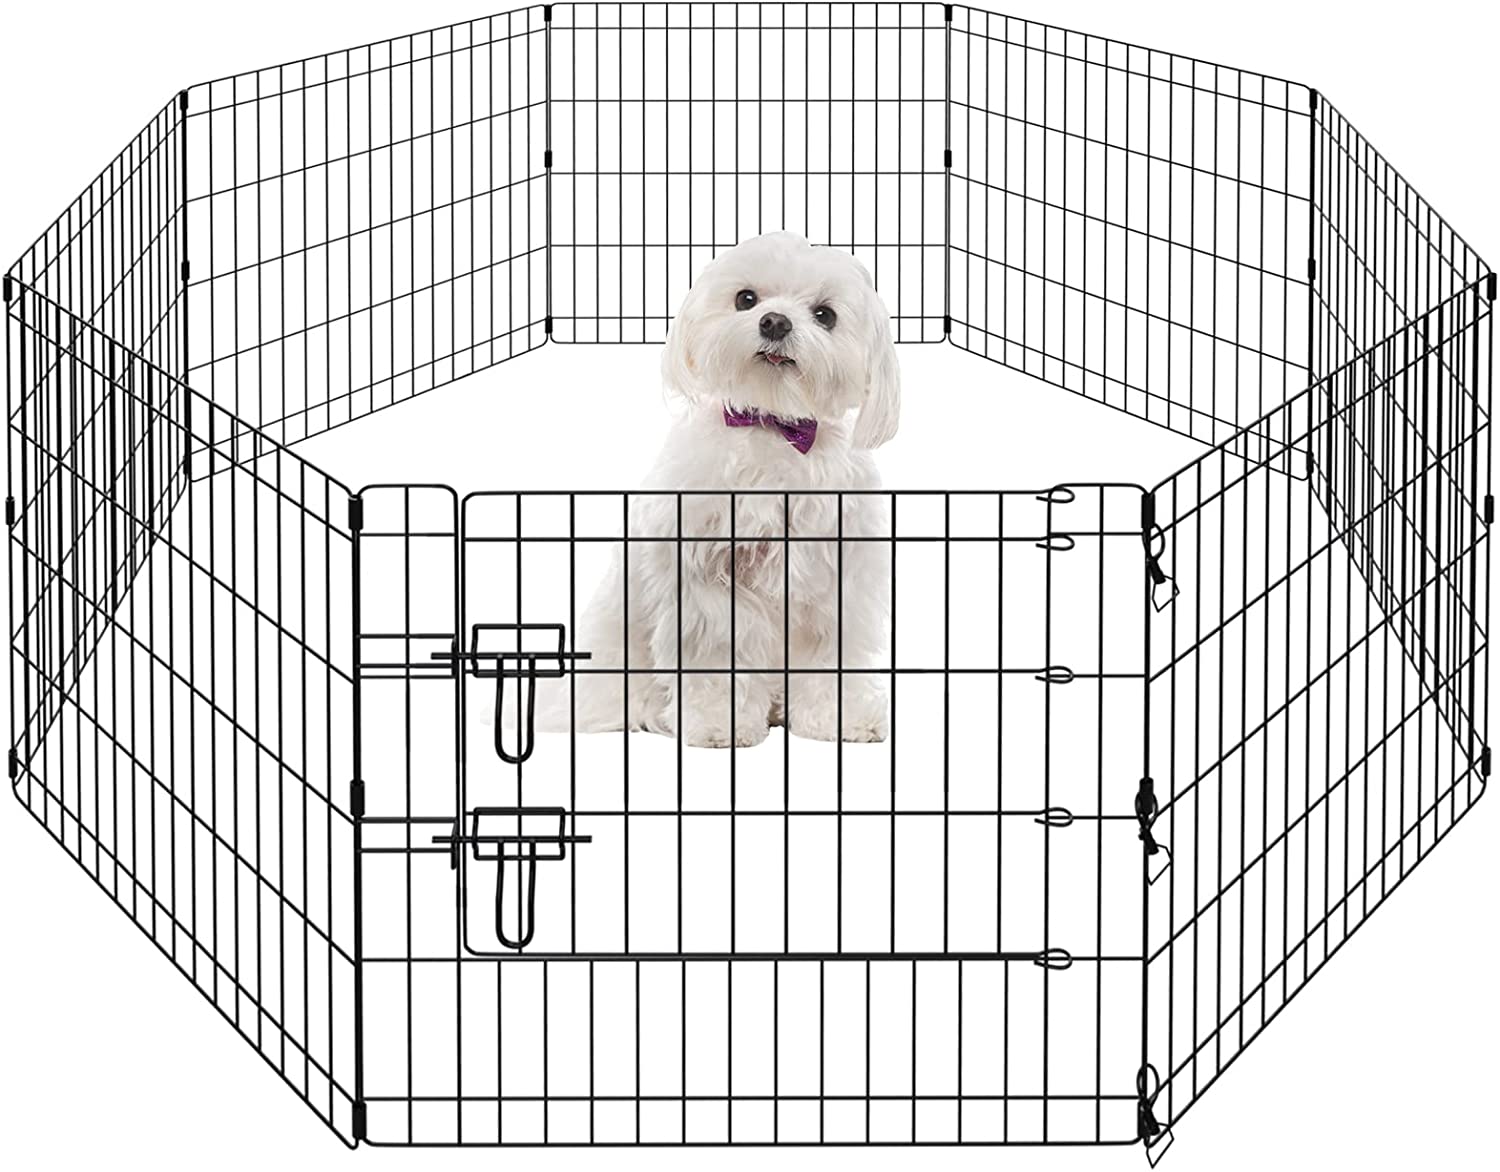 An image of a white maltese puppy in an X-pen to demonstrate how basic puppy training tools & concepts at home. X-Pens are a great way to transition from the crate to some house freedoms.